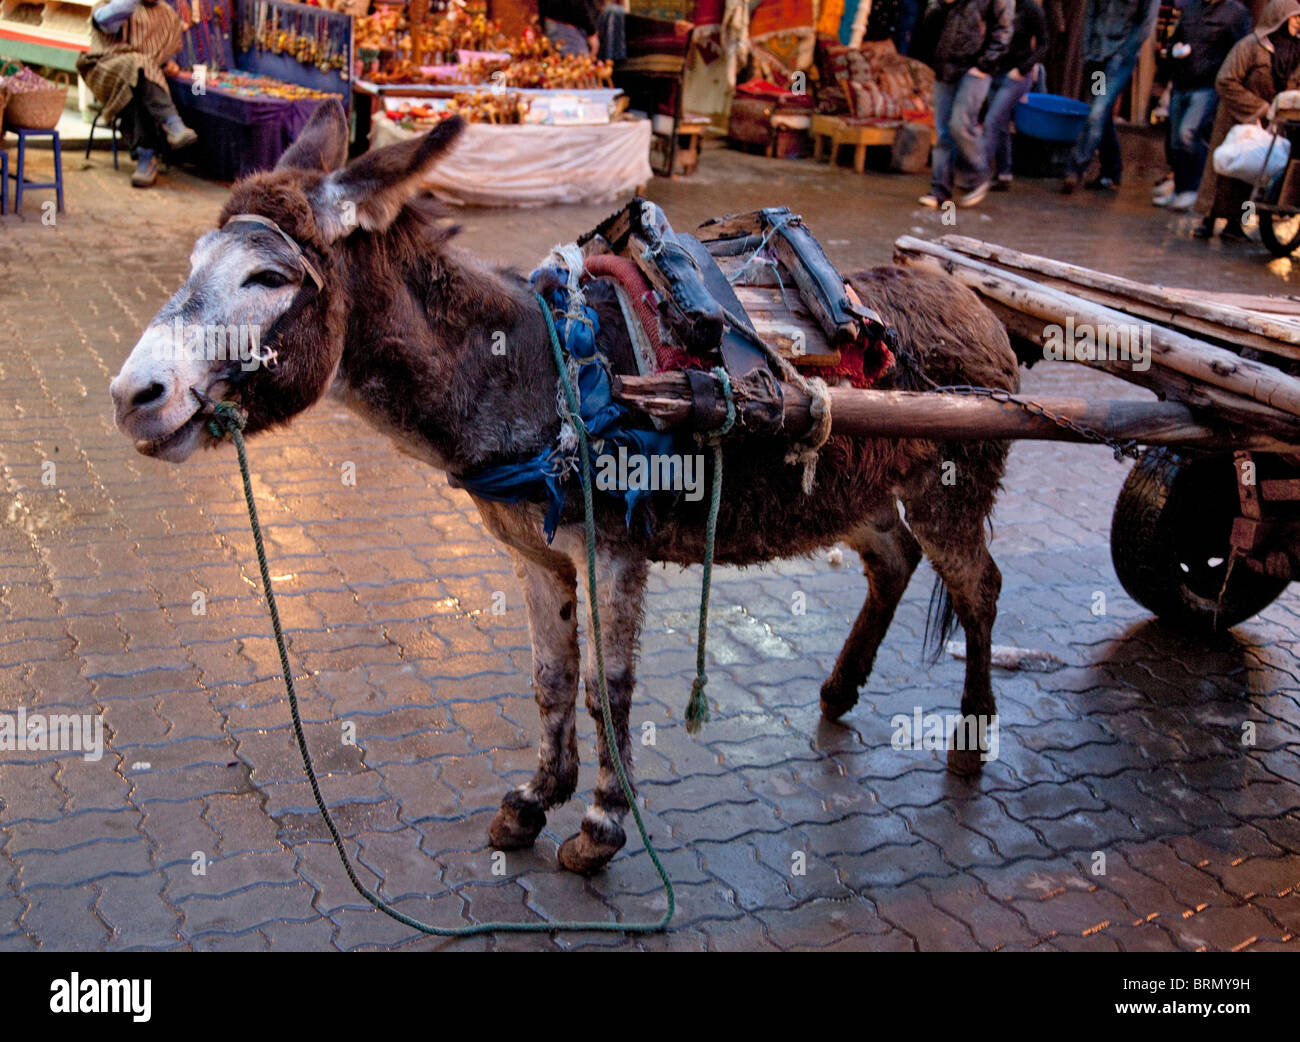 Donkey harnessed to a cart at a market Stock Photo